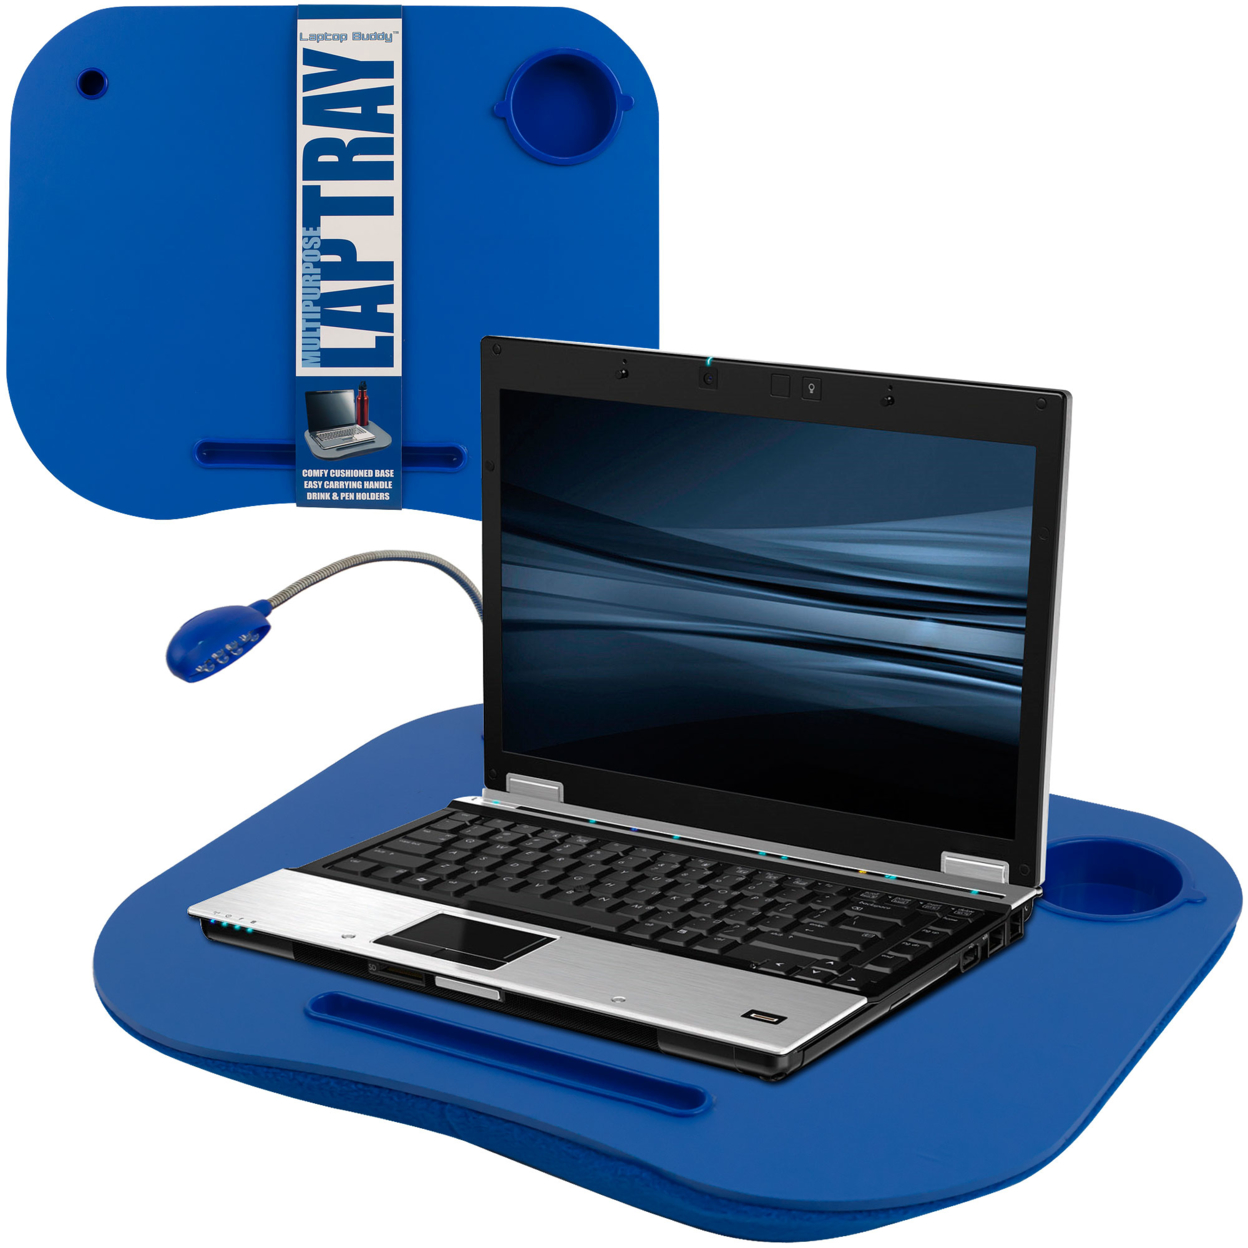 Portable LapTop Desk With Handle And LED Light - Squishy Bottom 19 X 15